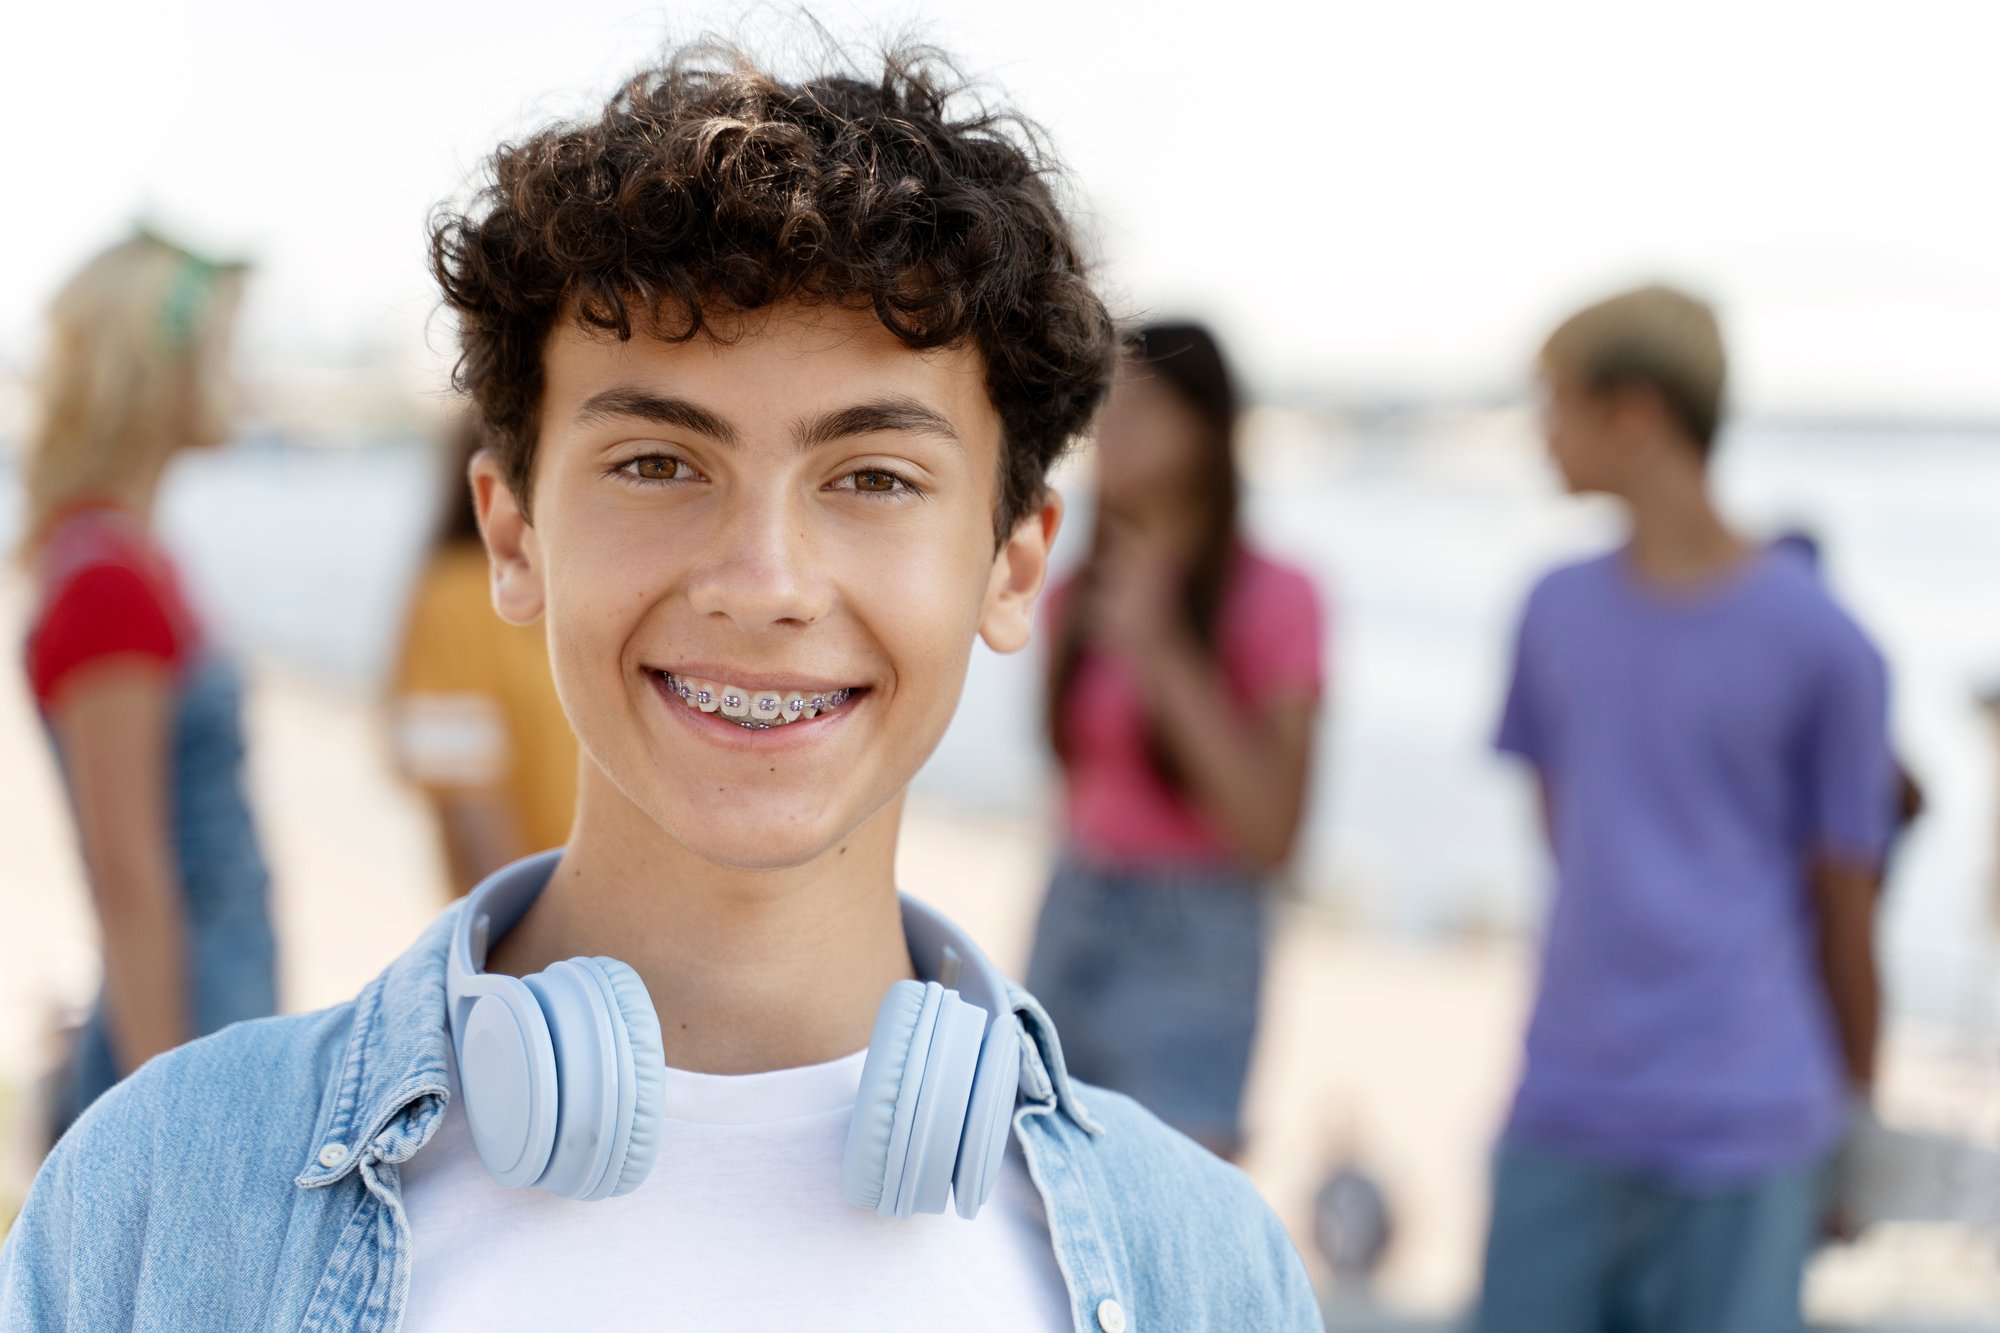 TN-Mental-Wellness-Teen-boy-smiling-with-braces-and-headphones-around-his-neck-with-people-in-background